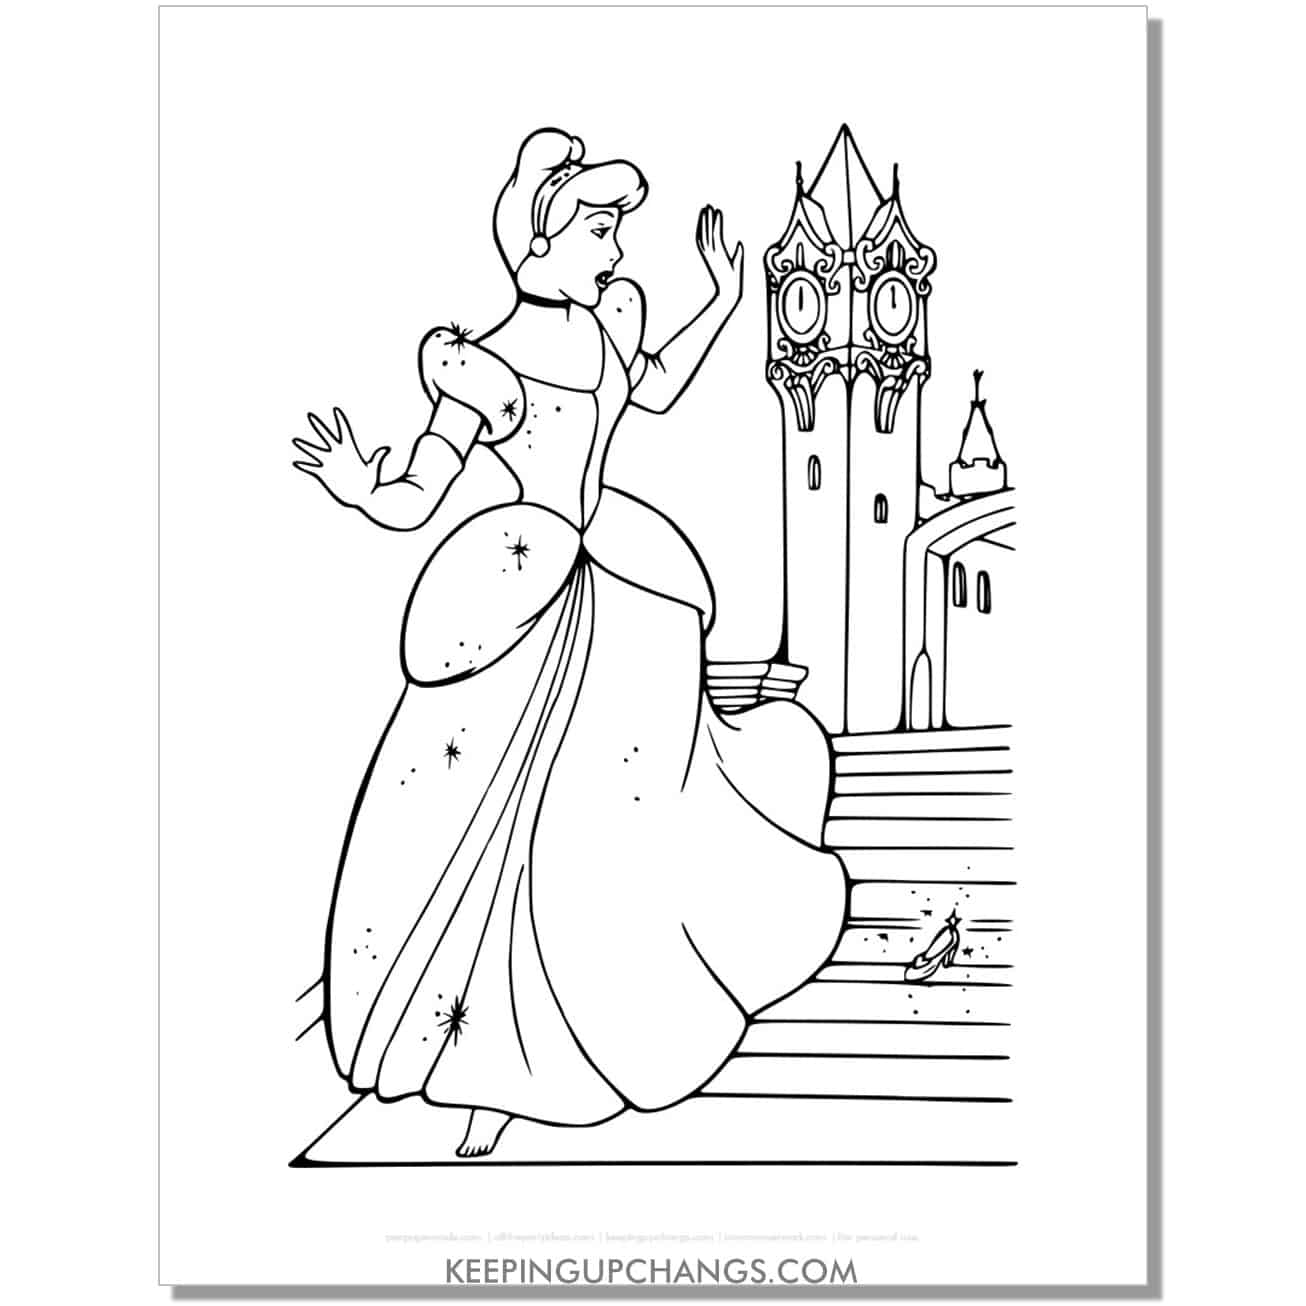 cinderella's glass slipper on steps coloring page, sheet.